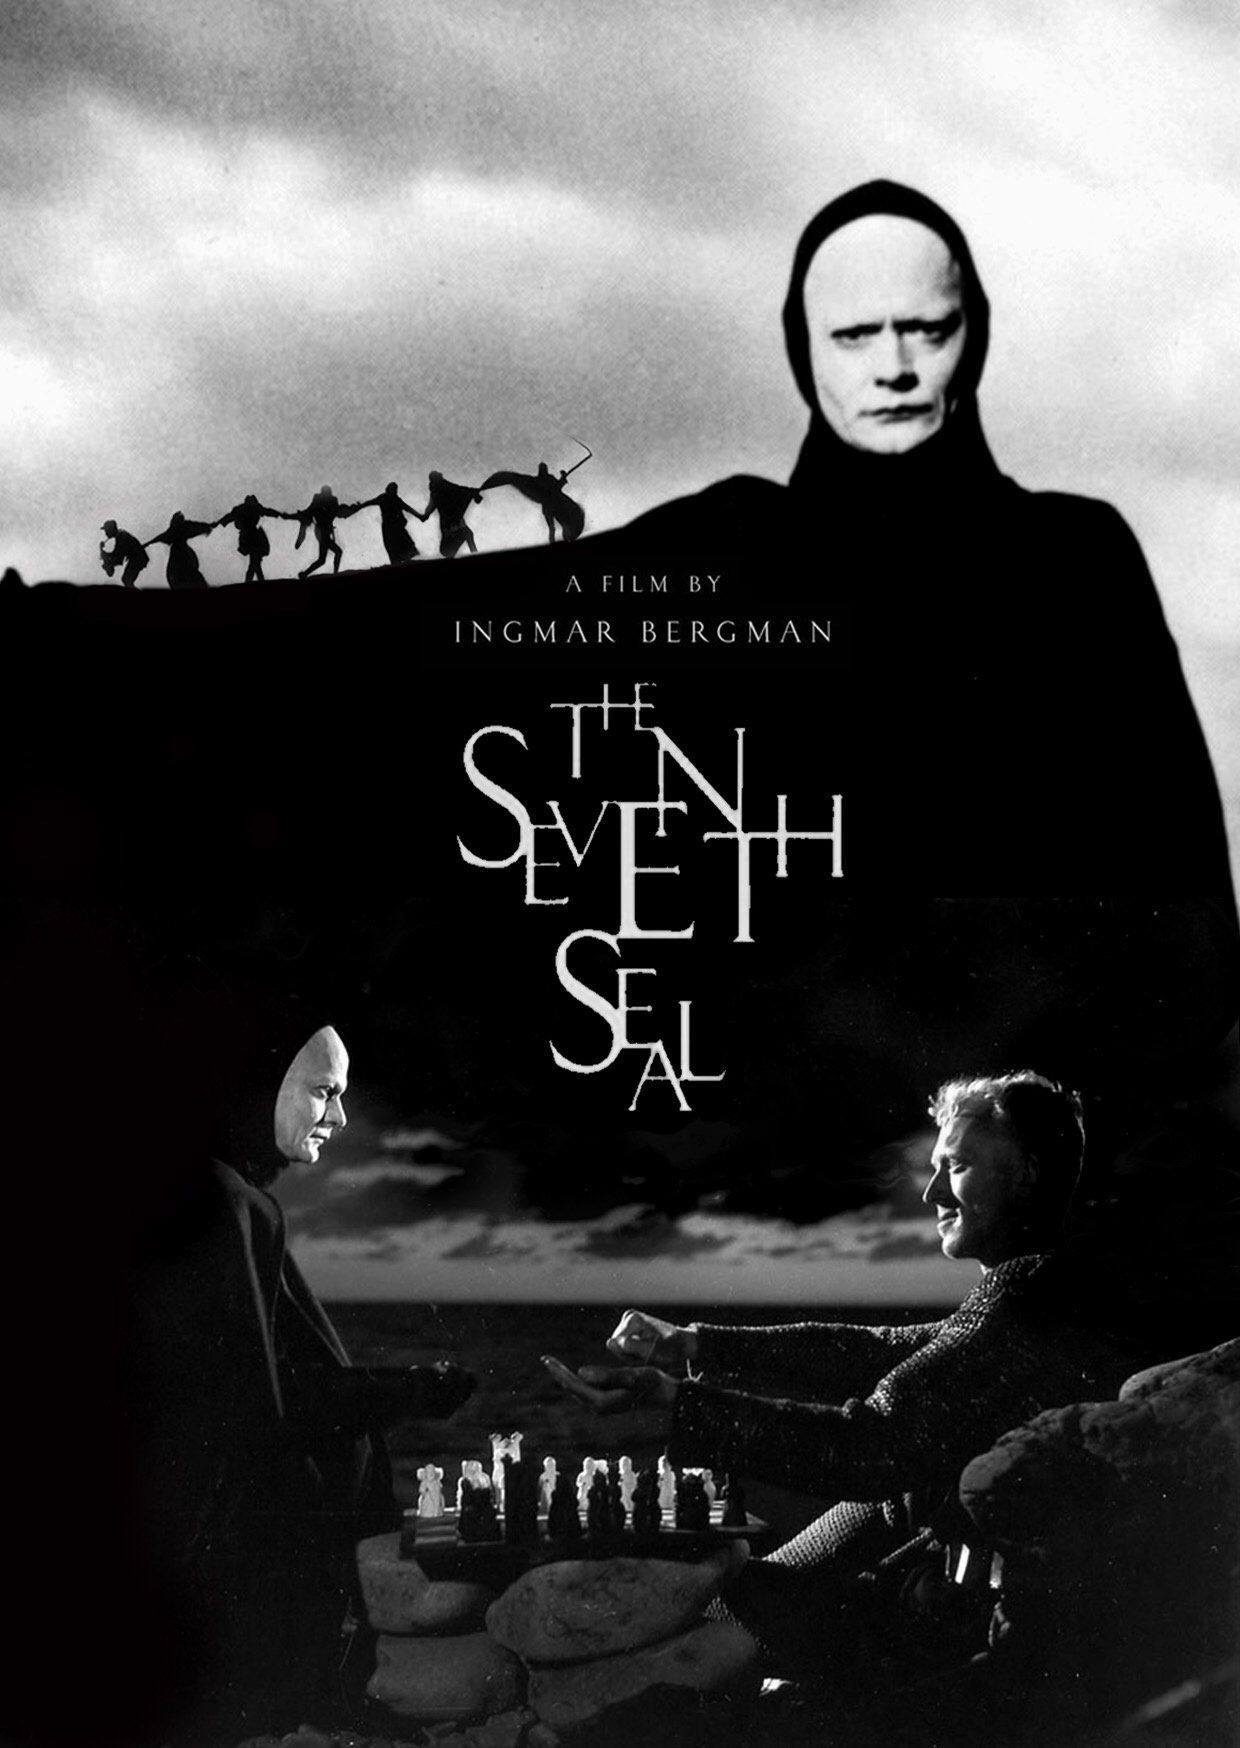 THE SEVENTH SEAL